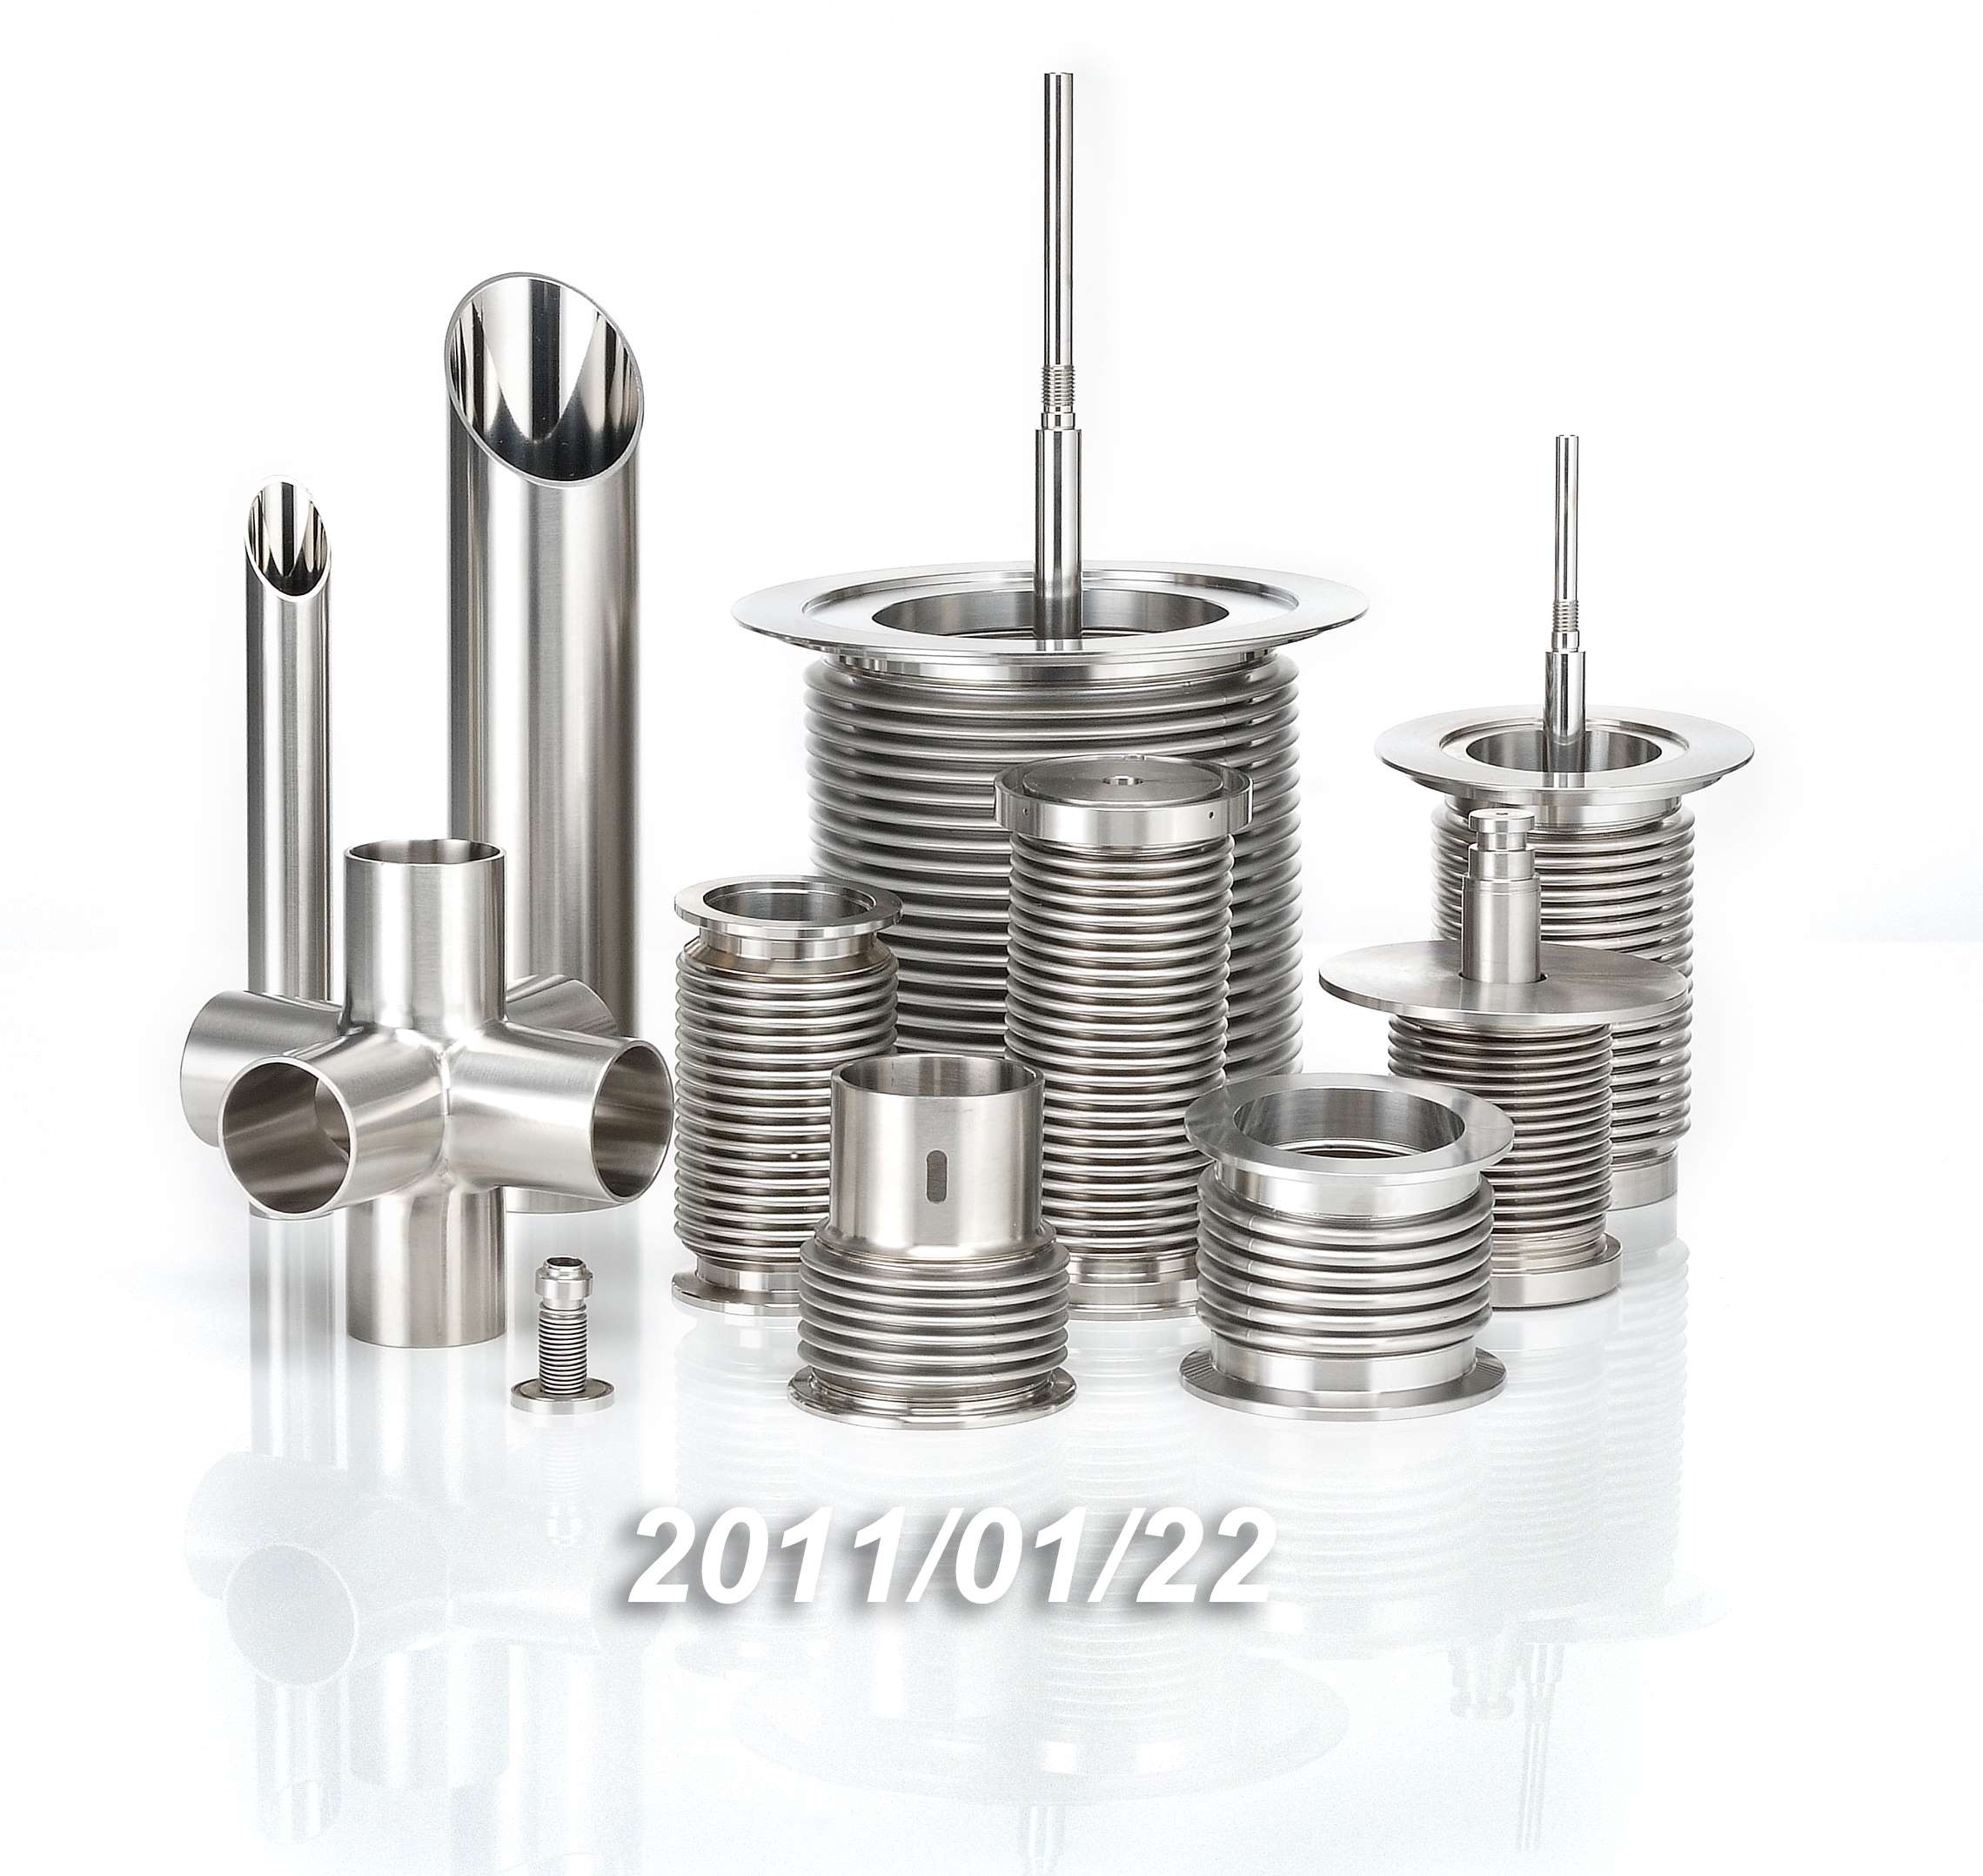 Qualified Tube Fitting Manufacturer and Supplier